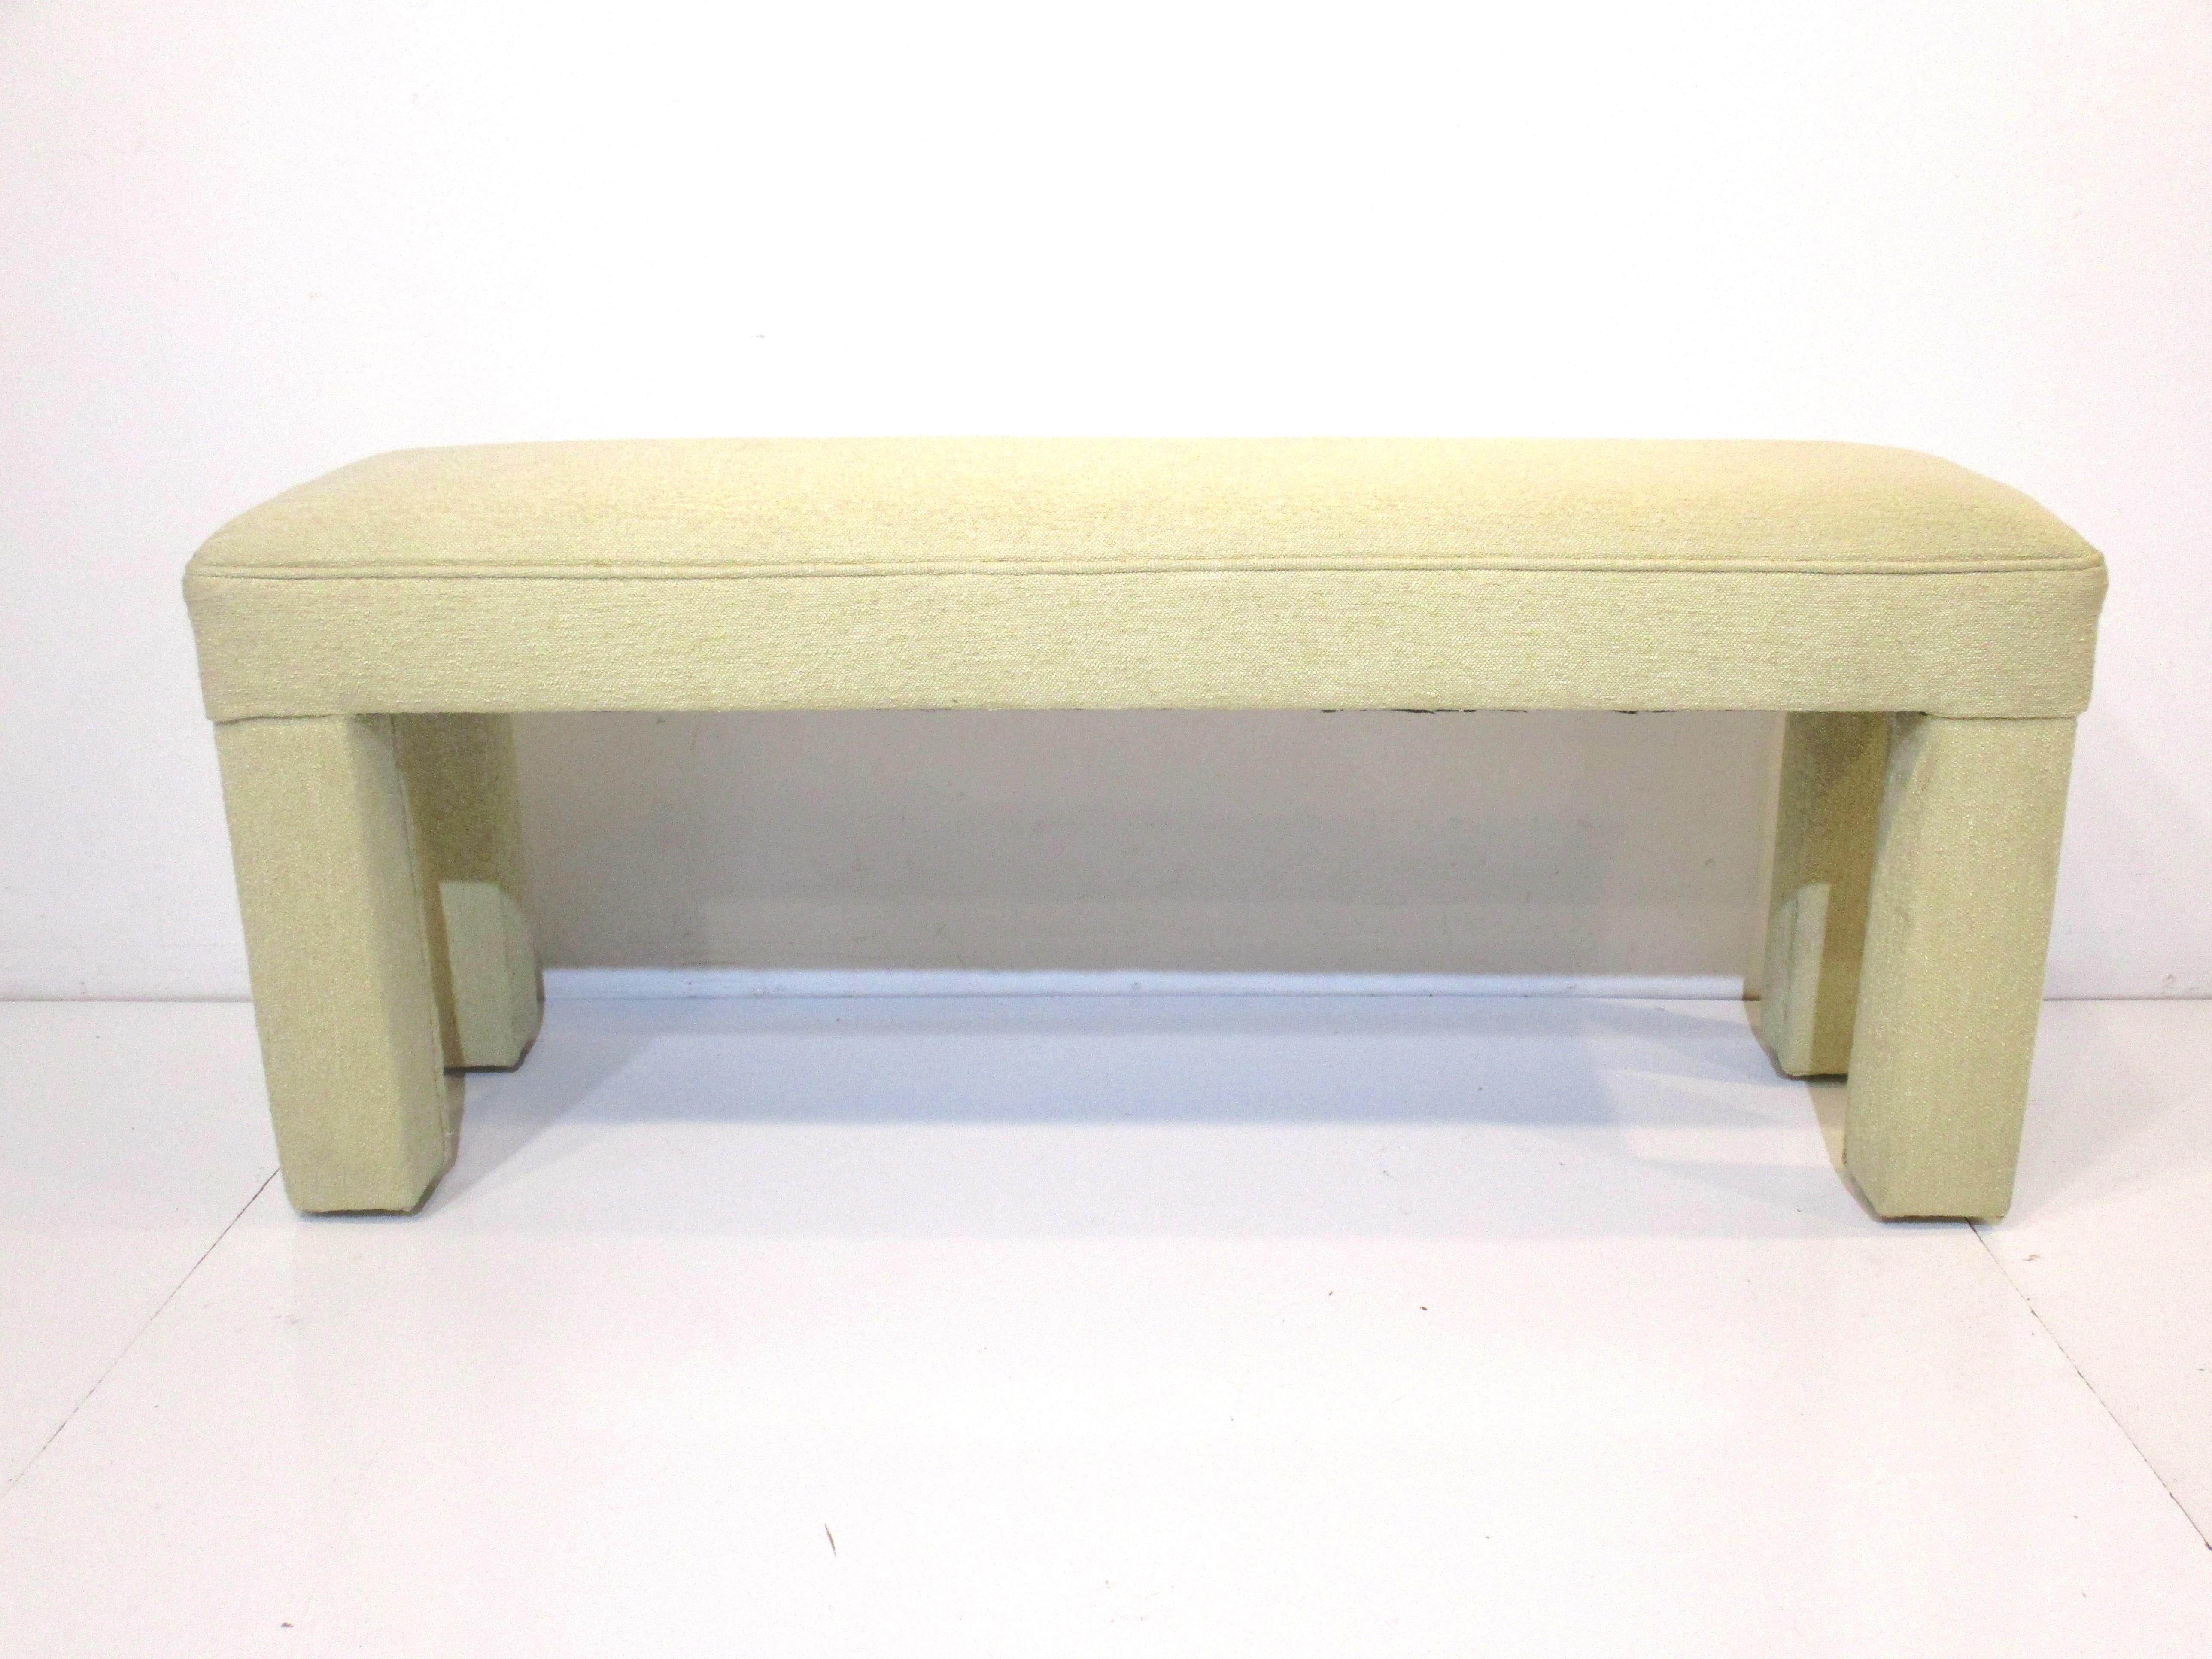 A nice slimer sized bench upholstered in a dark cream nubby contract fabric with covered legs in the style of Milo Baughman . The piece would work perfectly in a tight entrance way because of it's size or at the foot of a bed.